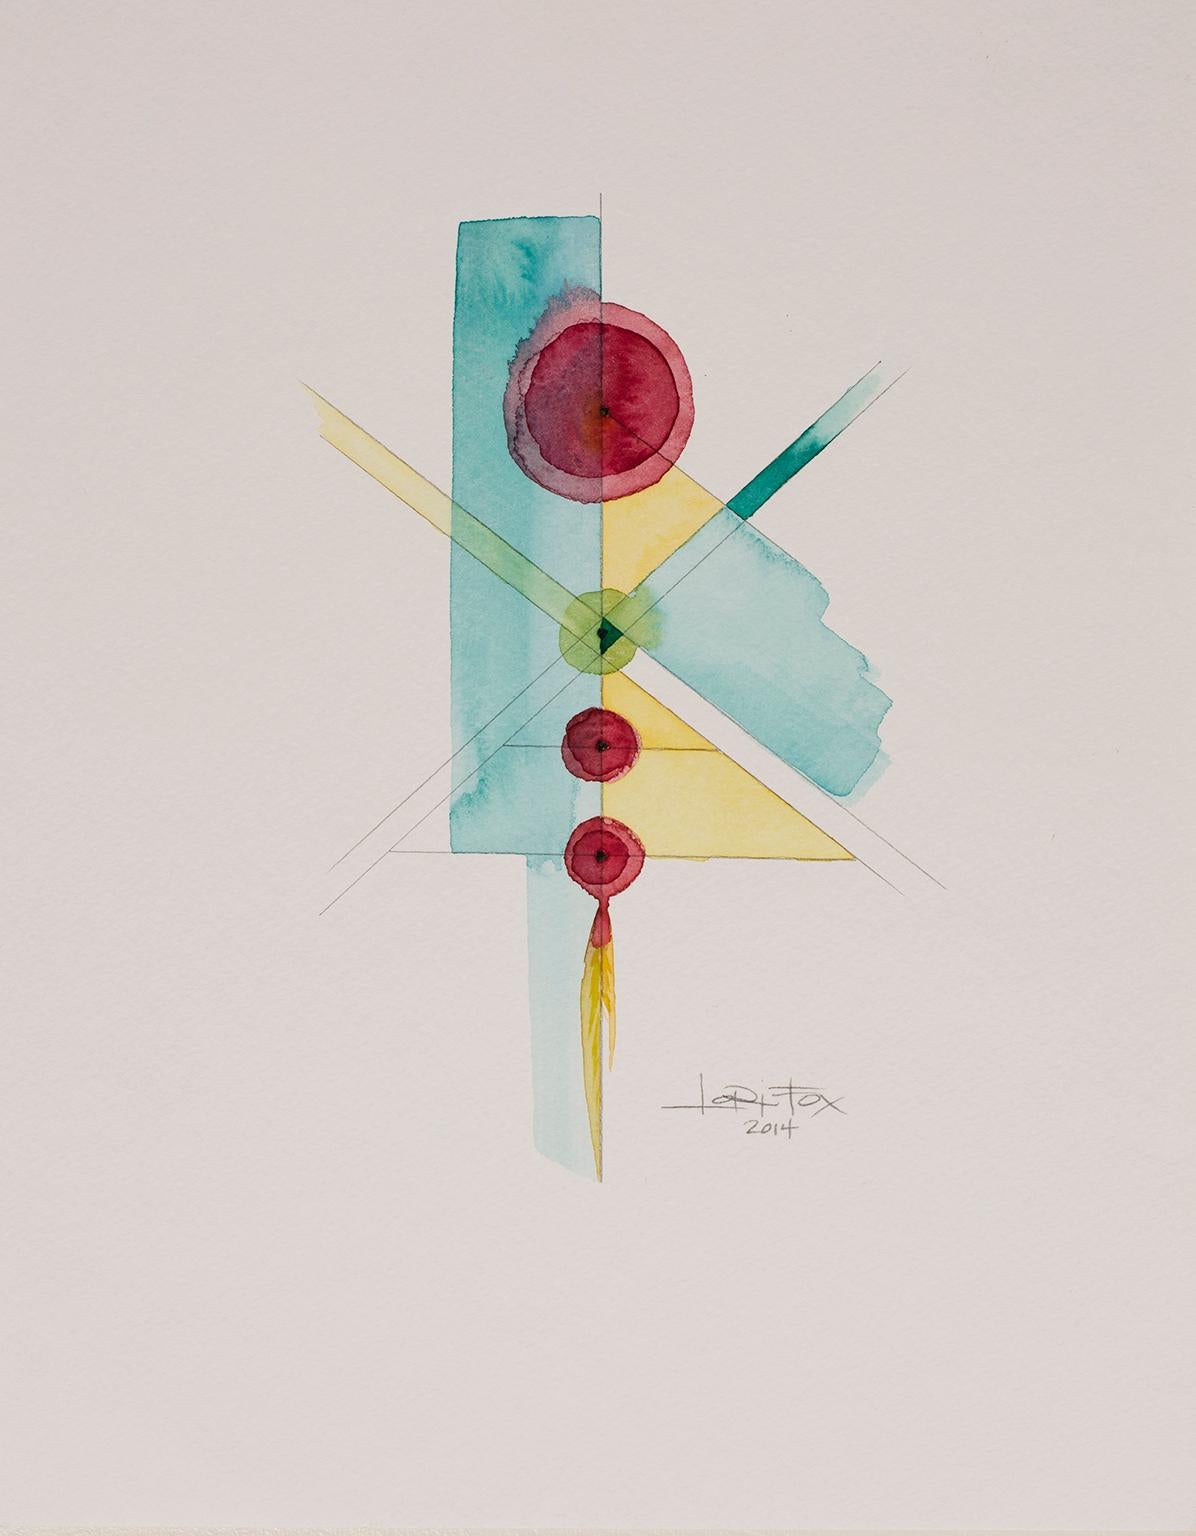 Totem 2.003, 2014 by Lori Fox
Watercolor and graphite on paper. 
14 x 11 inch unframed.  
Framed size is 15.25 x 12.25 x 1.75 inch (ask about framed price)
Light blue, red, yellow and green colors make this original from the Totem series by Lori